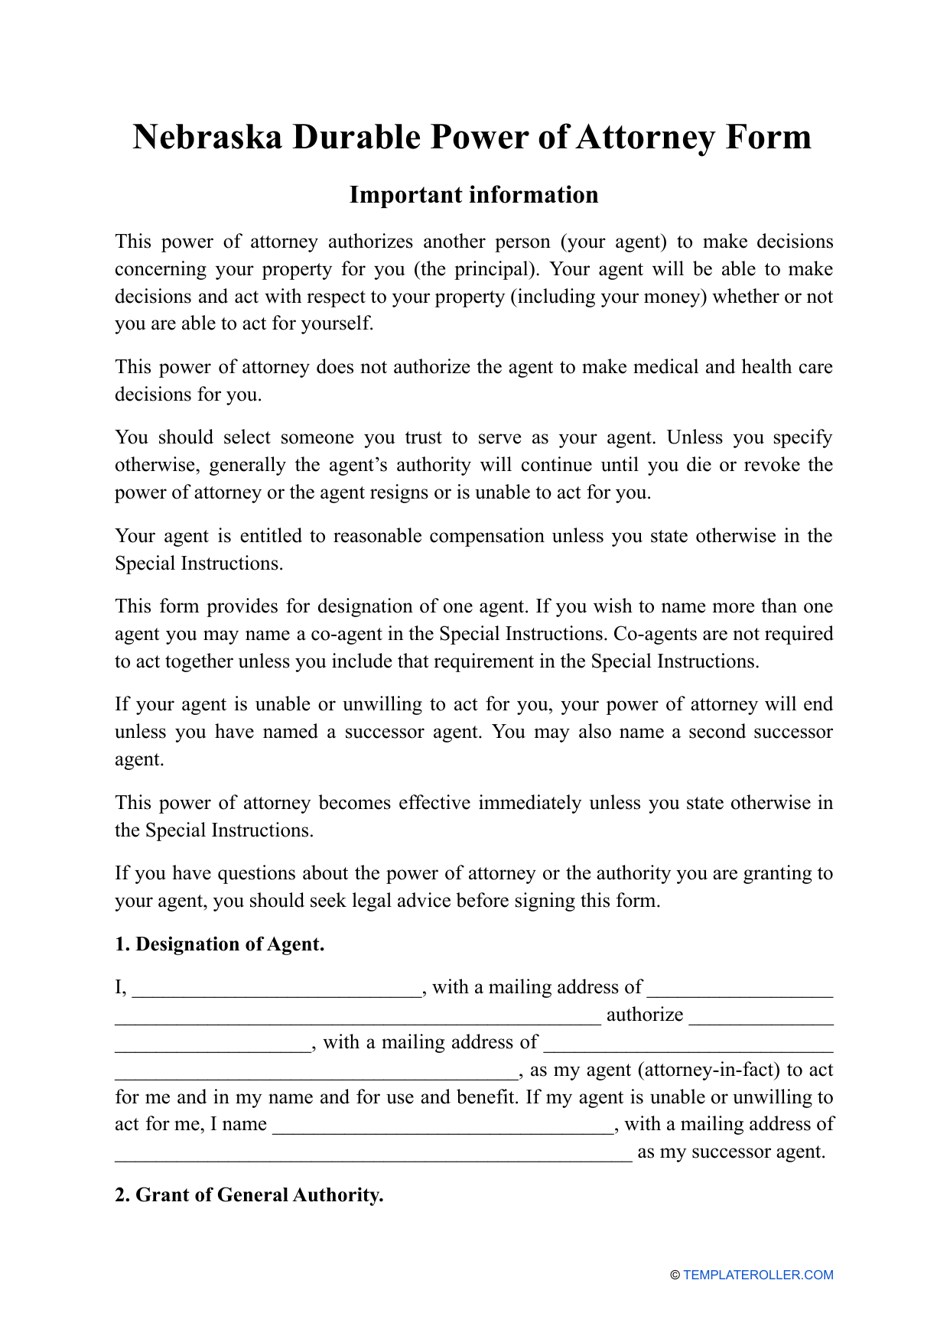 Durable Power of Attorney Form - Nebraska, Page 1